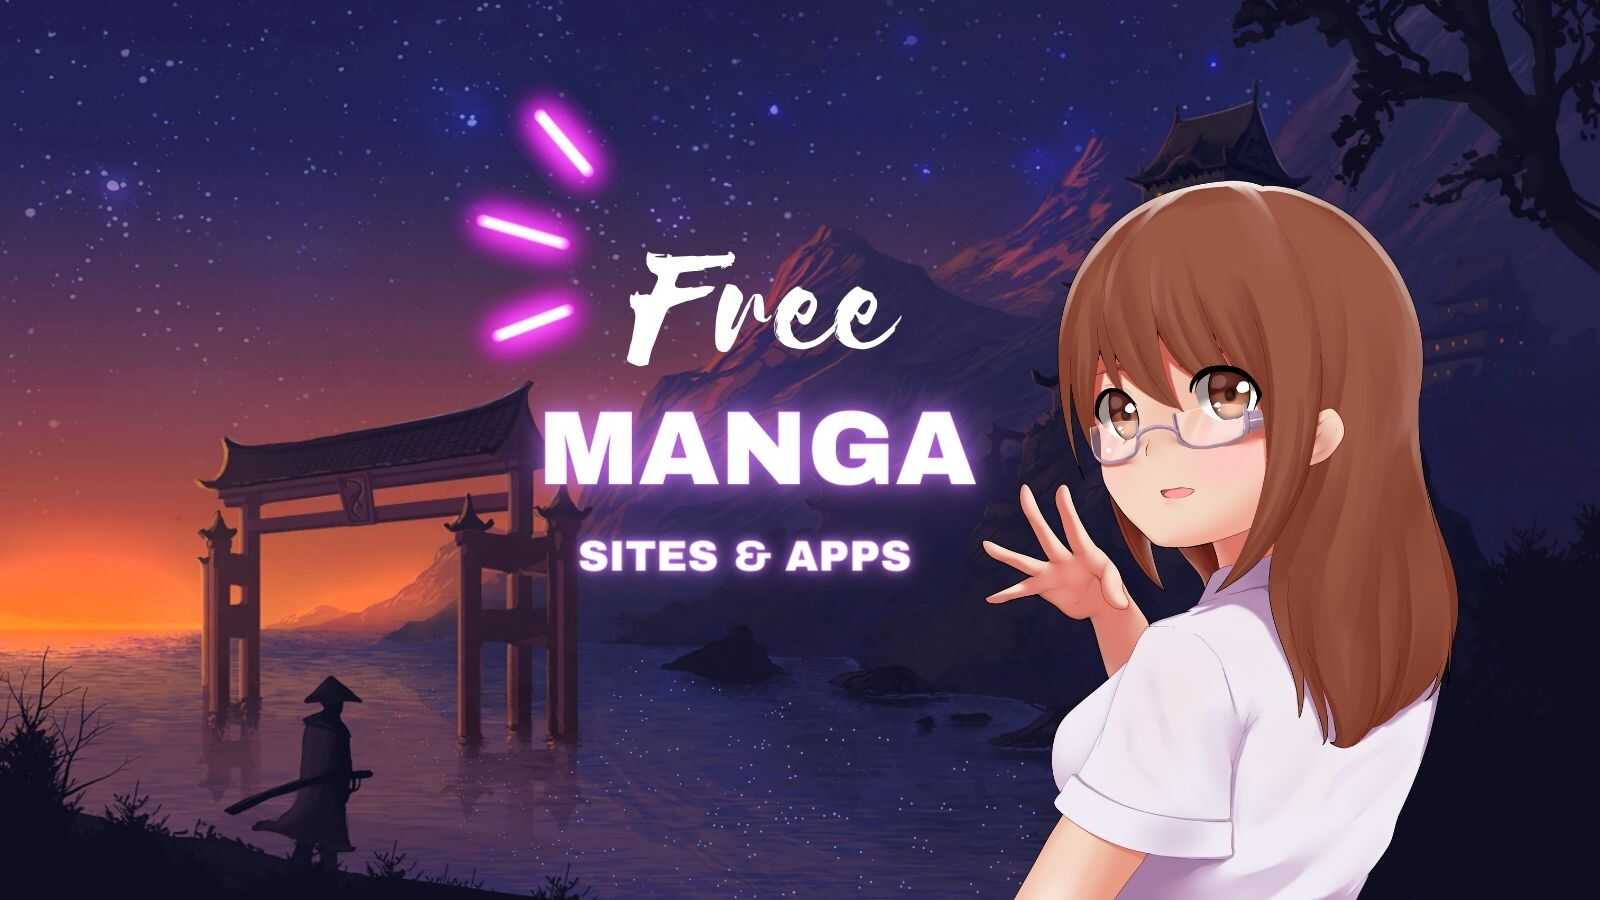 best free manga sites and apps for android and iOS